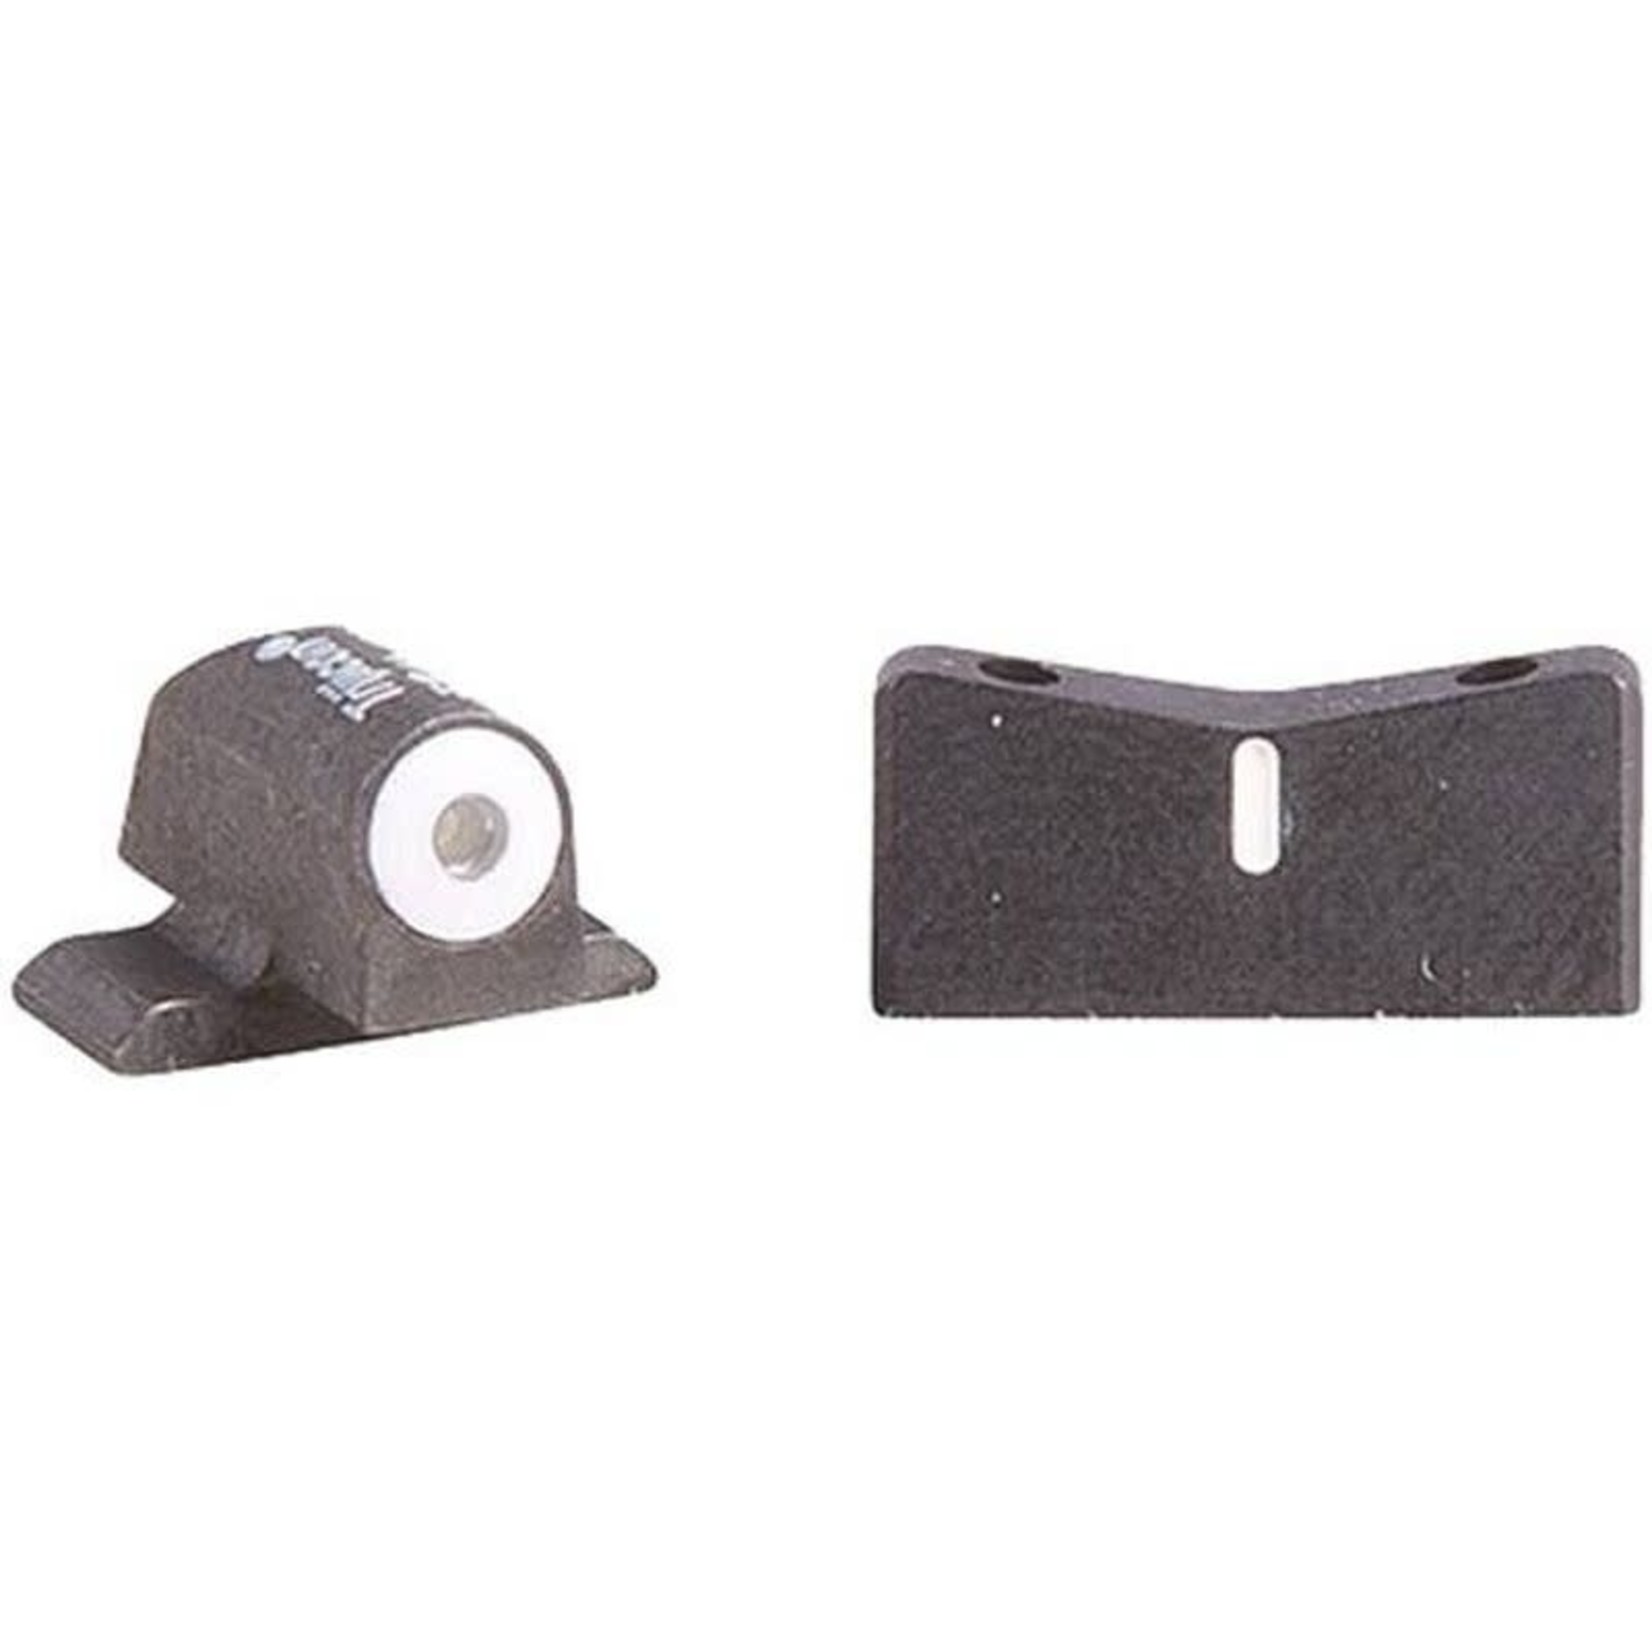 XS SIGHTS DXW DEFENSIVE EXPRESS NIGHT SIGHTS FOR S&W BODYGUARD 380